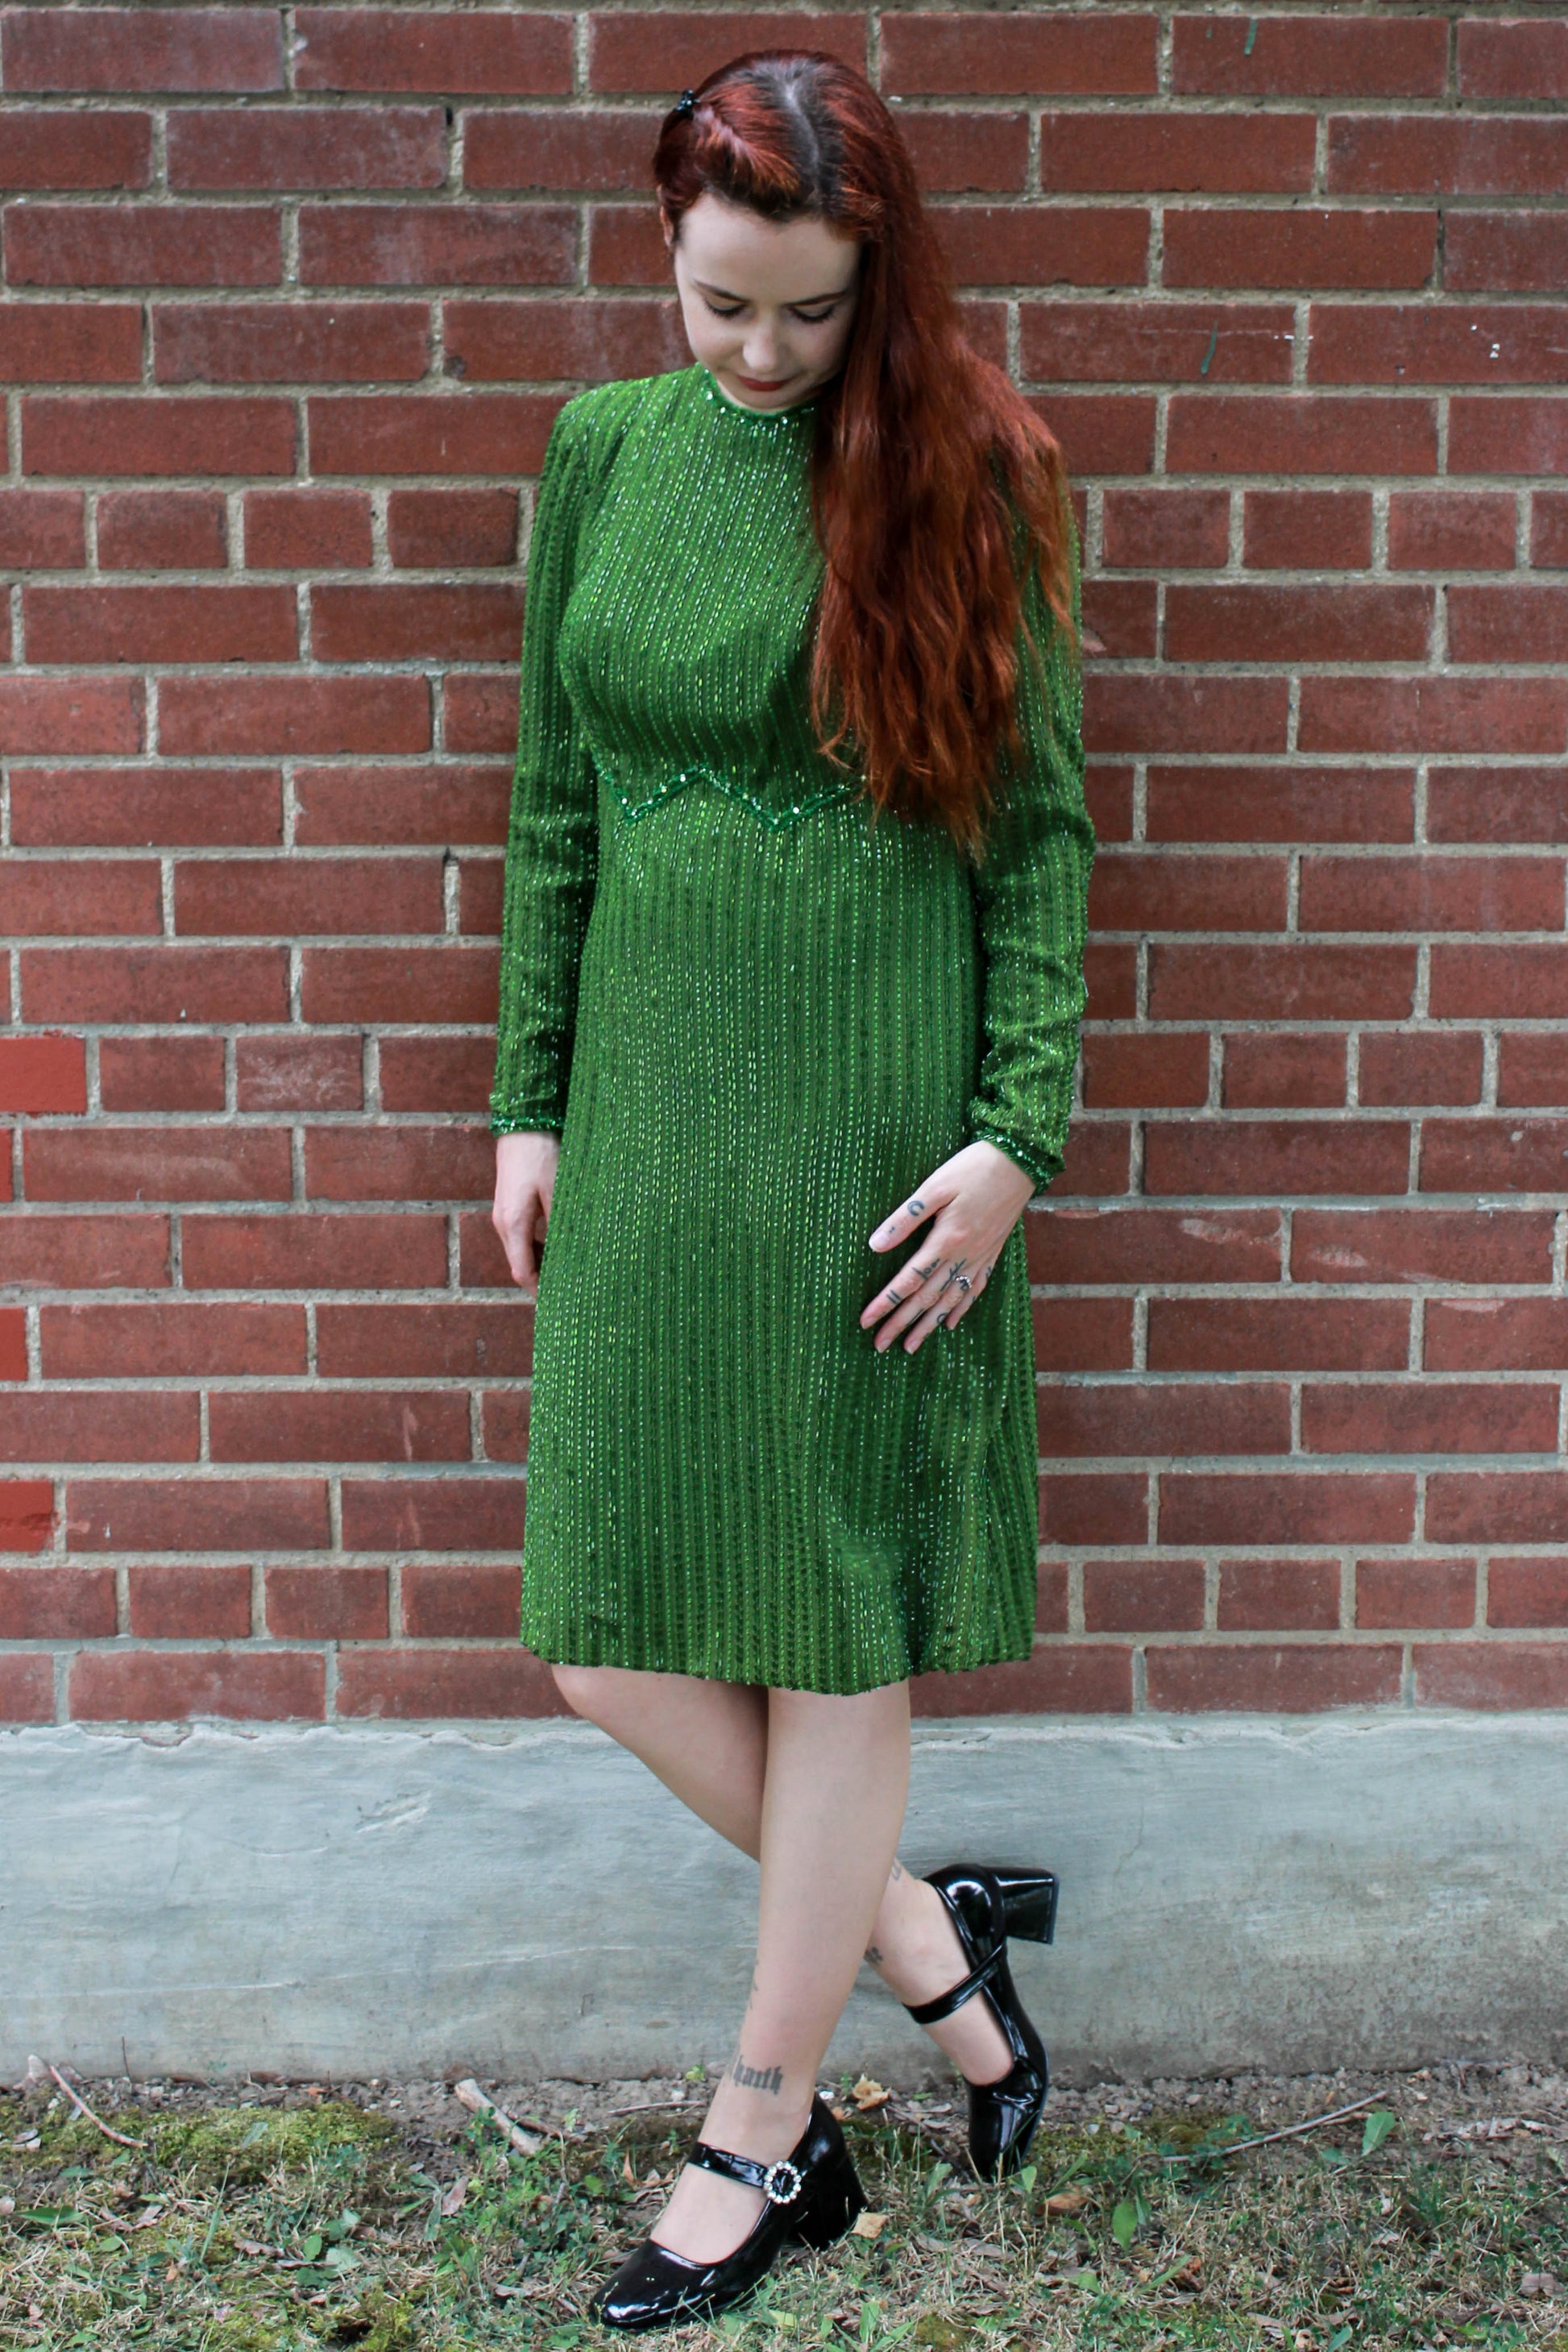 Cozy Fall Outfit: Brick Red Sweater, Forest Green Tights